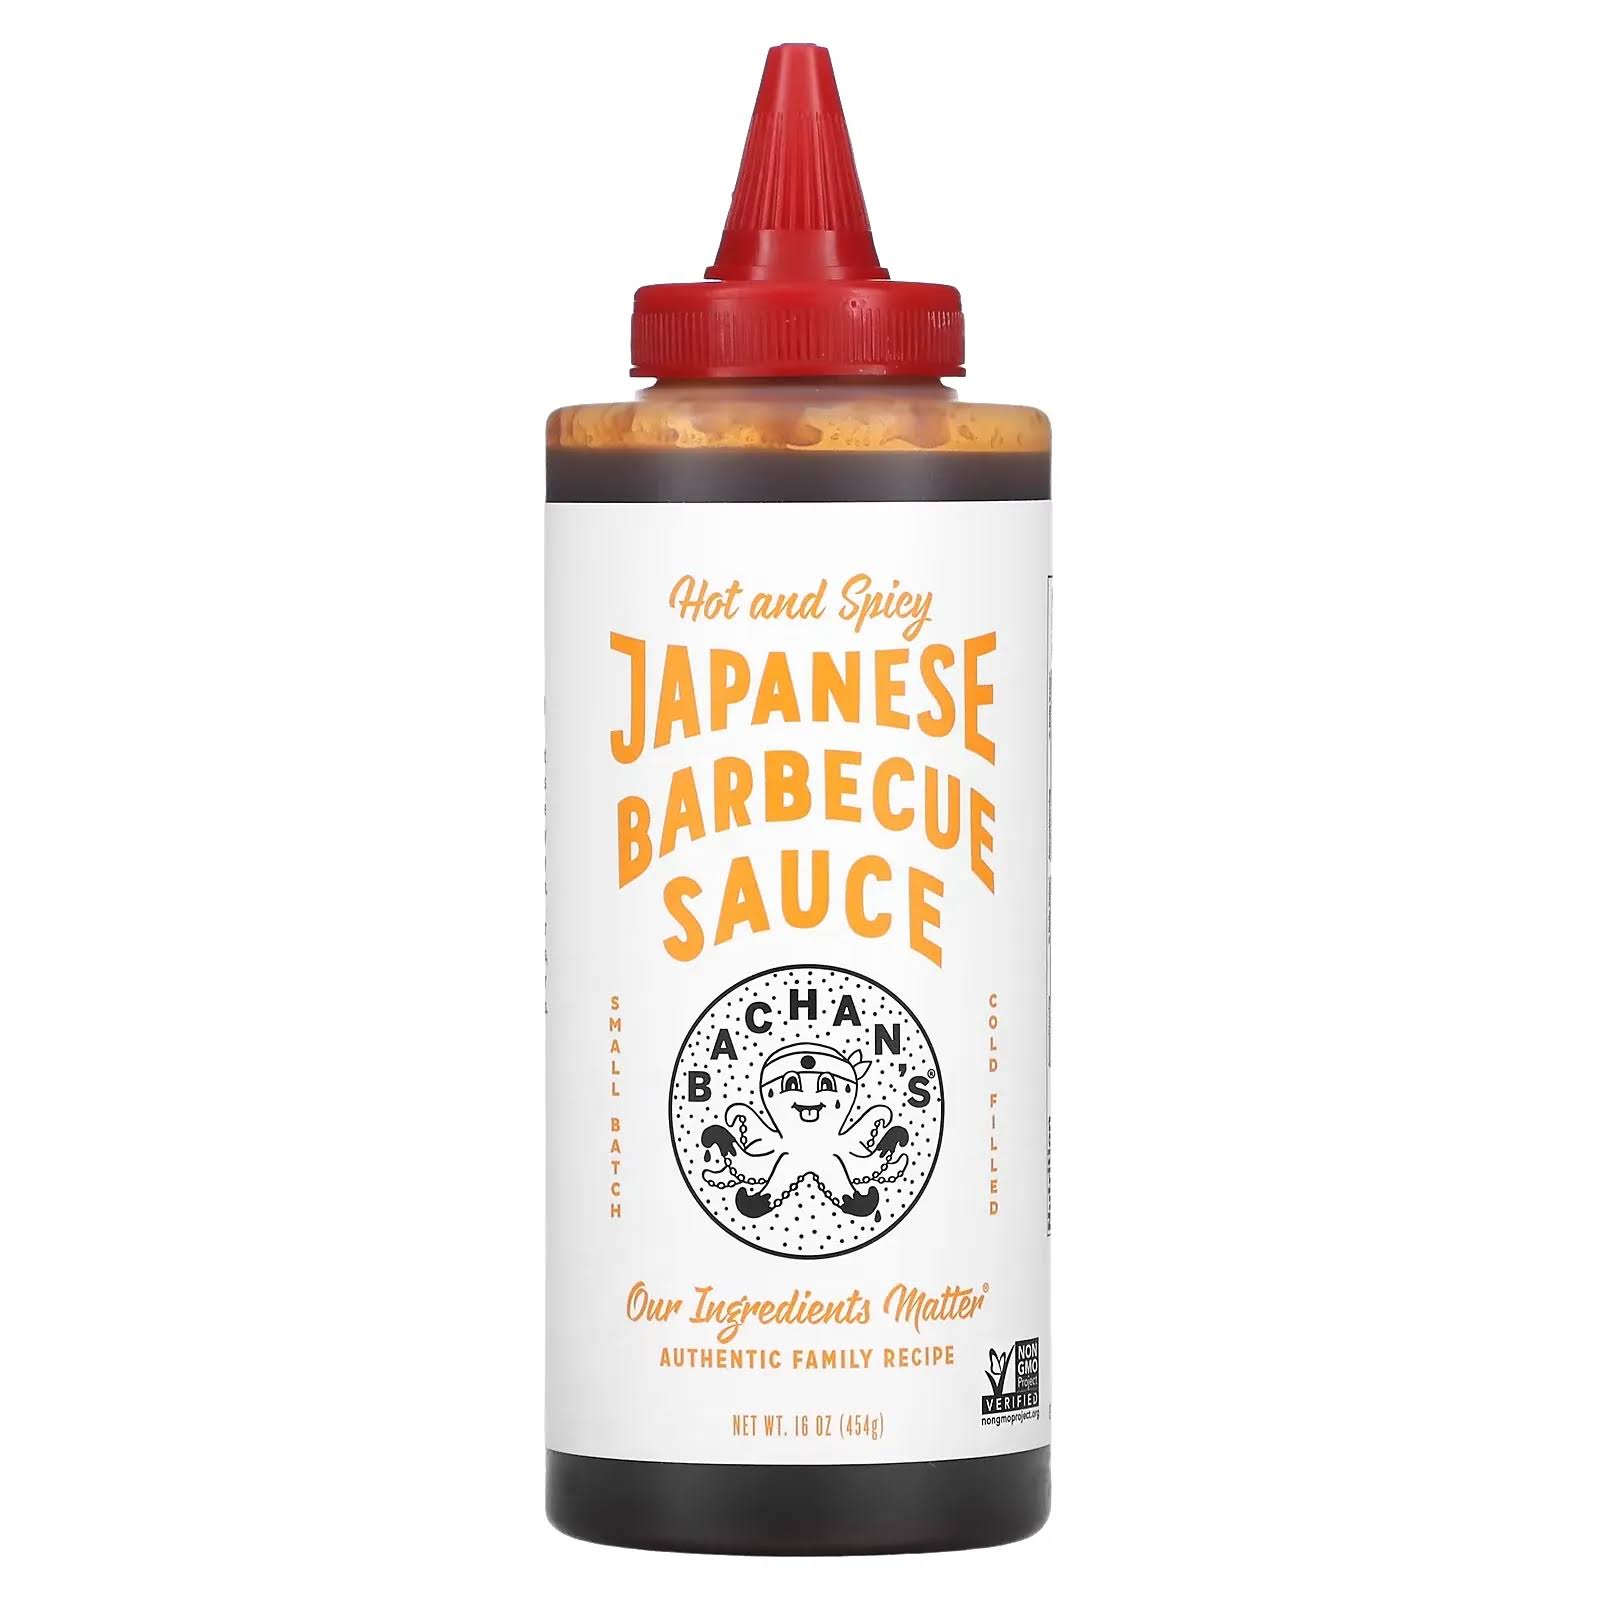 Bachan's, Japanese Barbecue Sauce, Hot and Spicy, 16 oz (454 g)